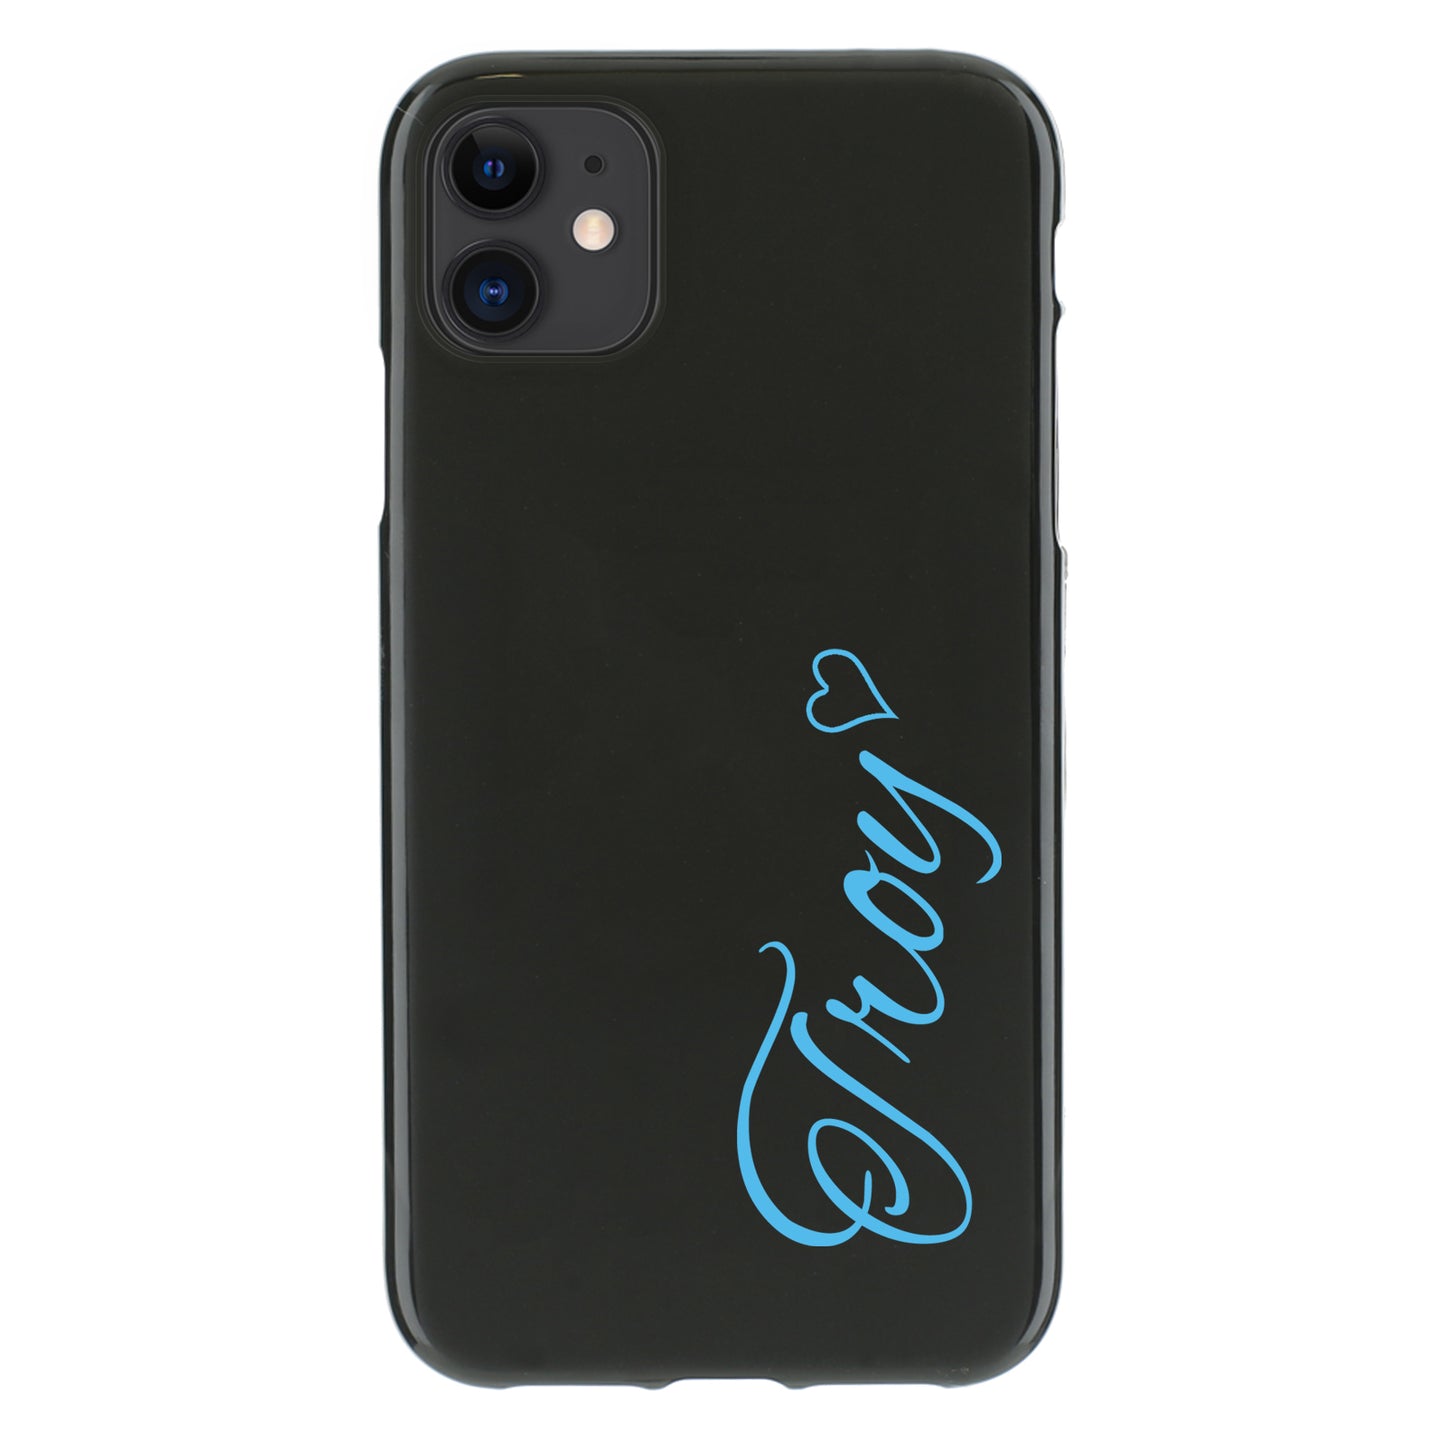 Personalised Nokia Phone Gel Case with Light Blue Heart Accented Text